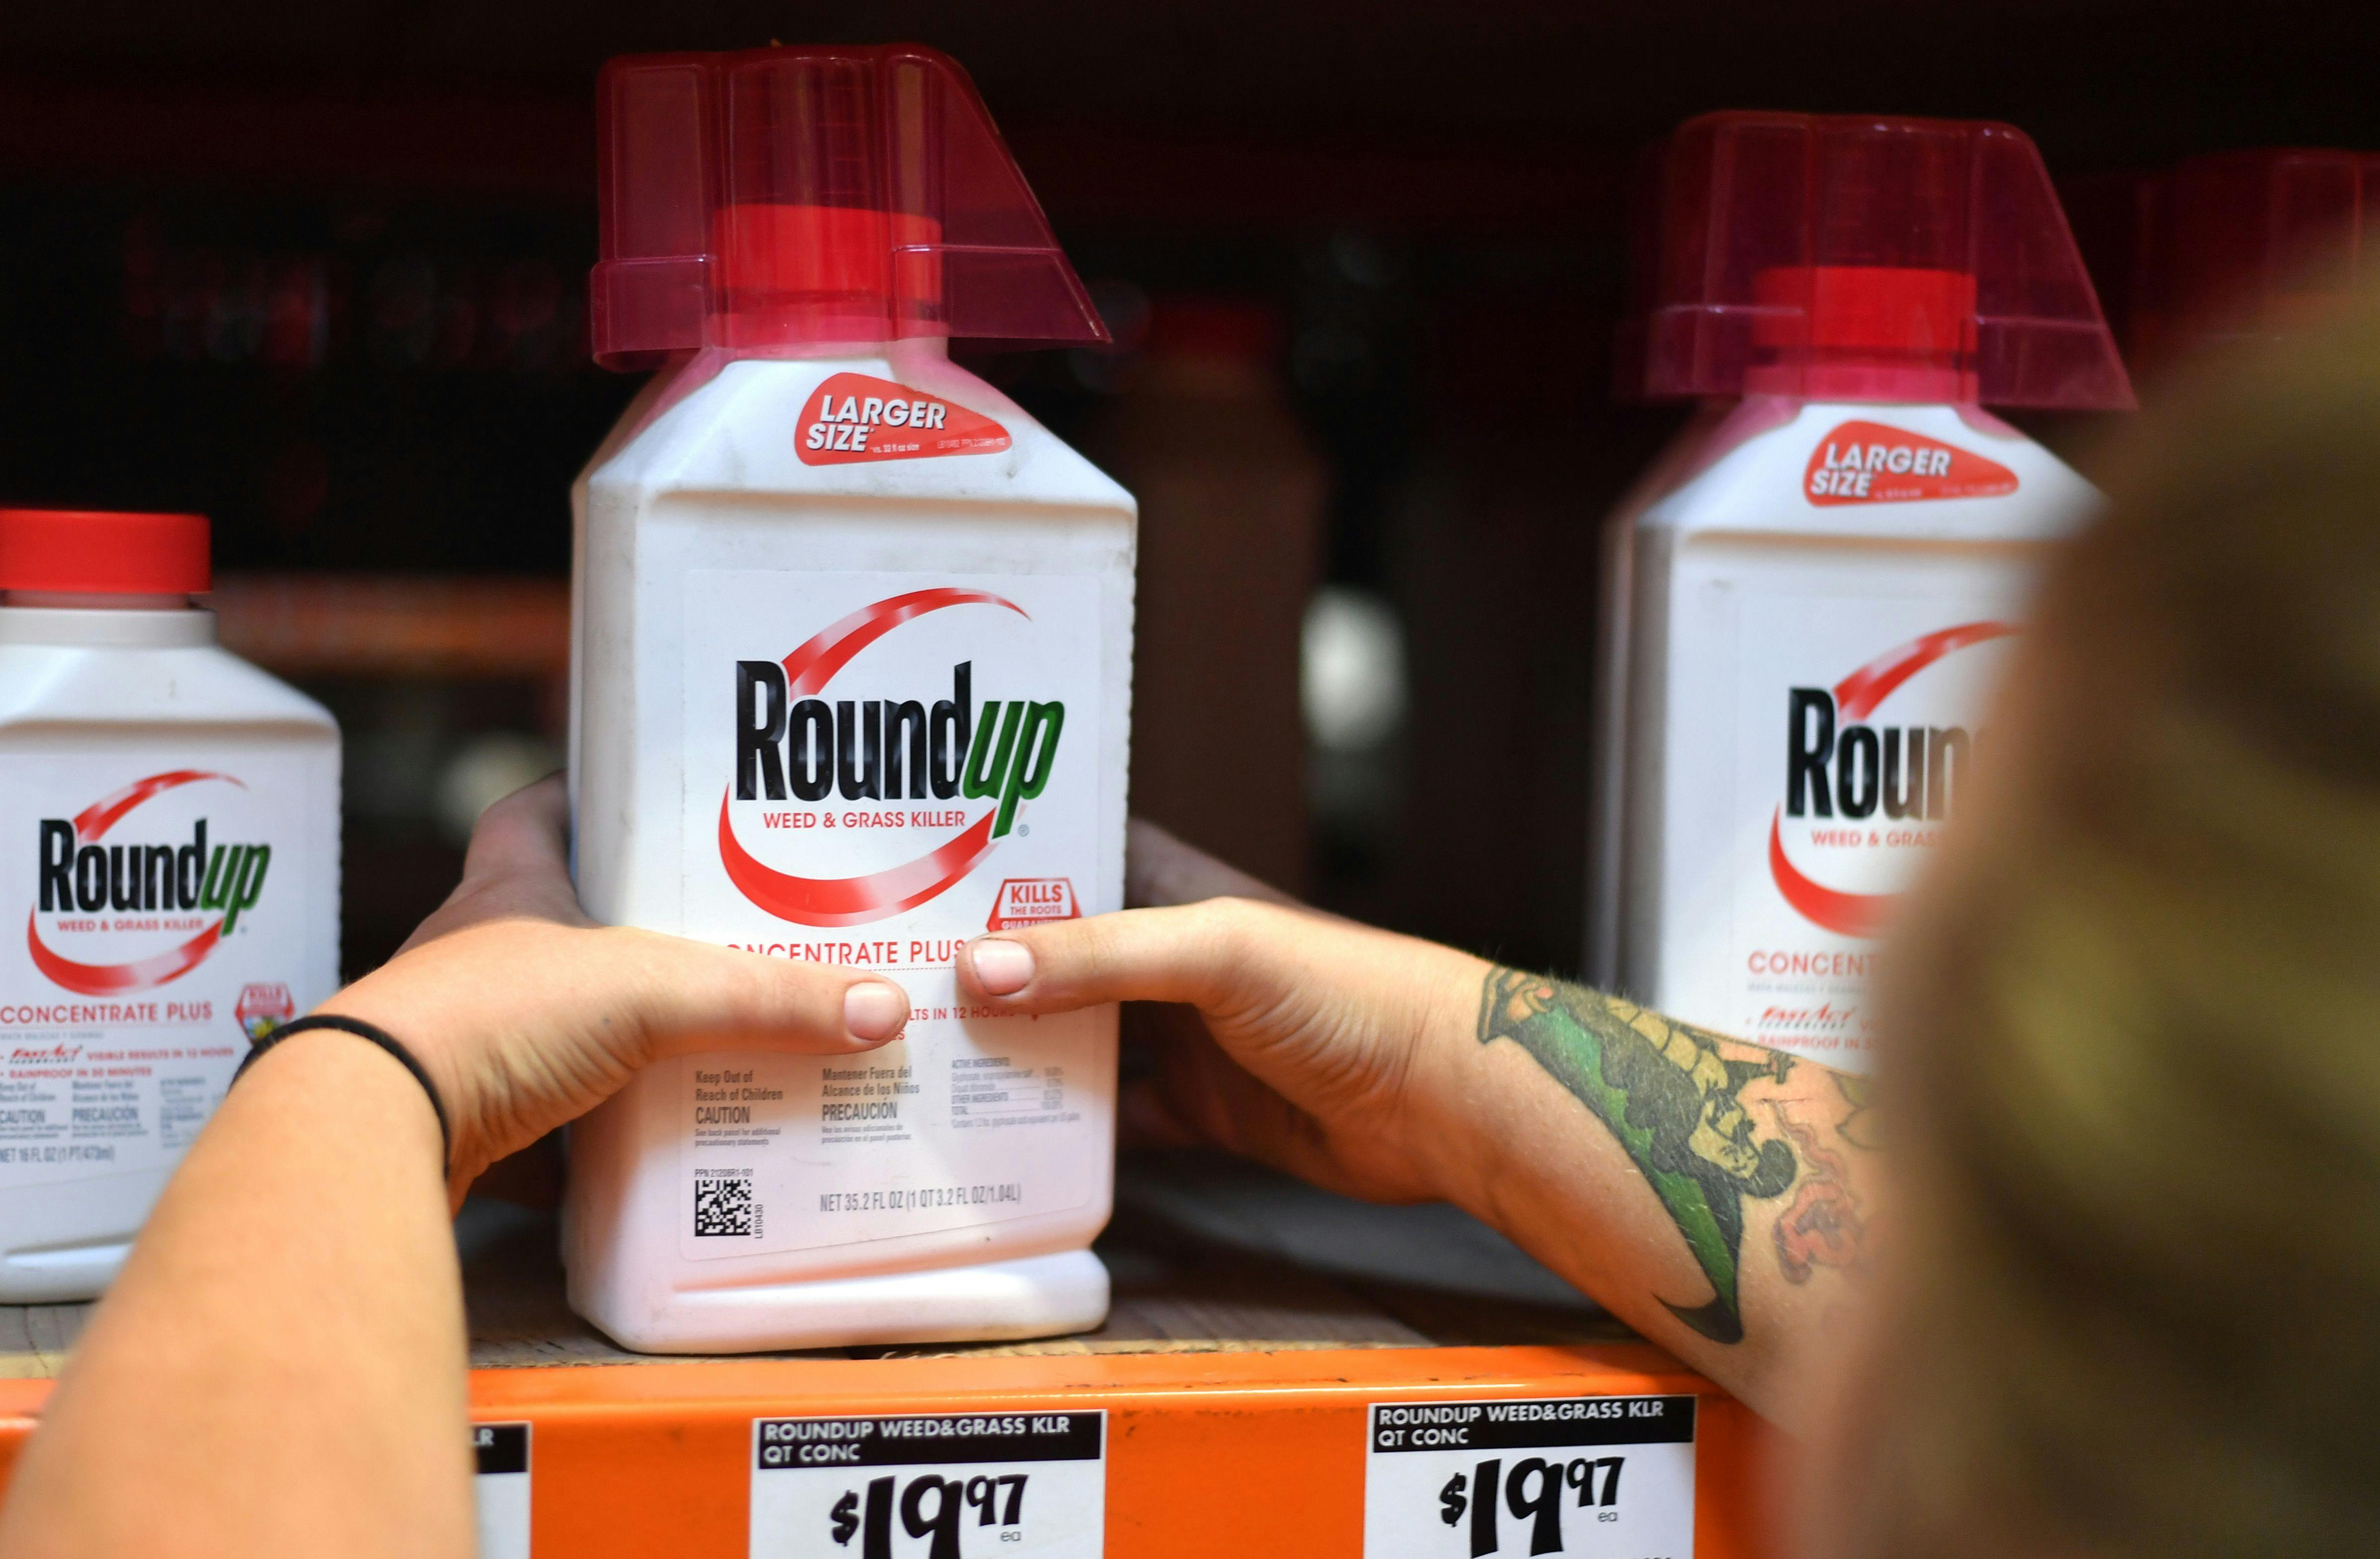 EU abandons promise to ban toxic chemicals in consumer products